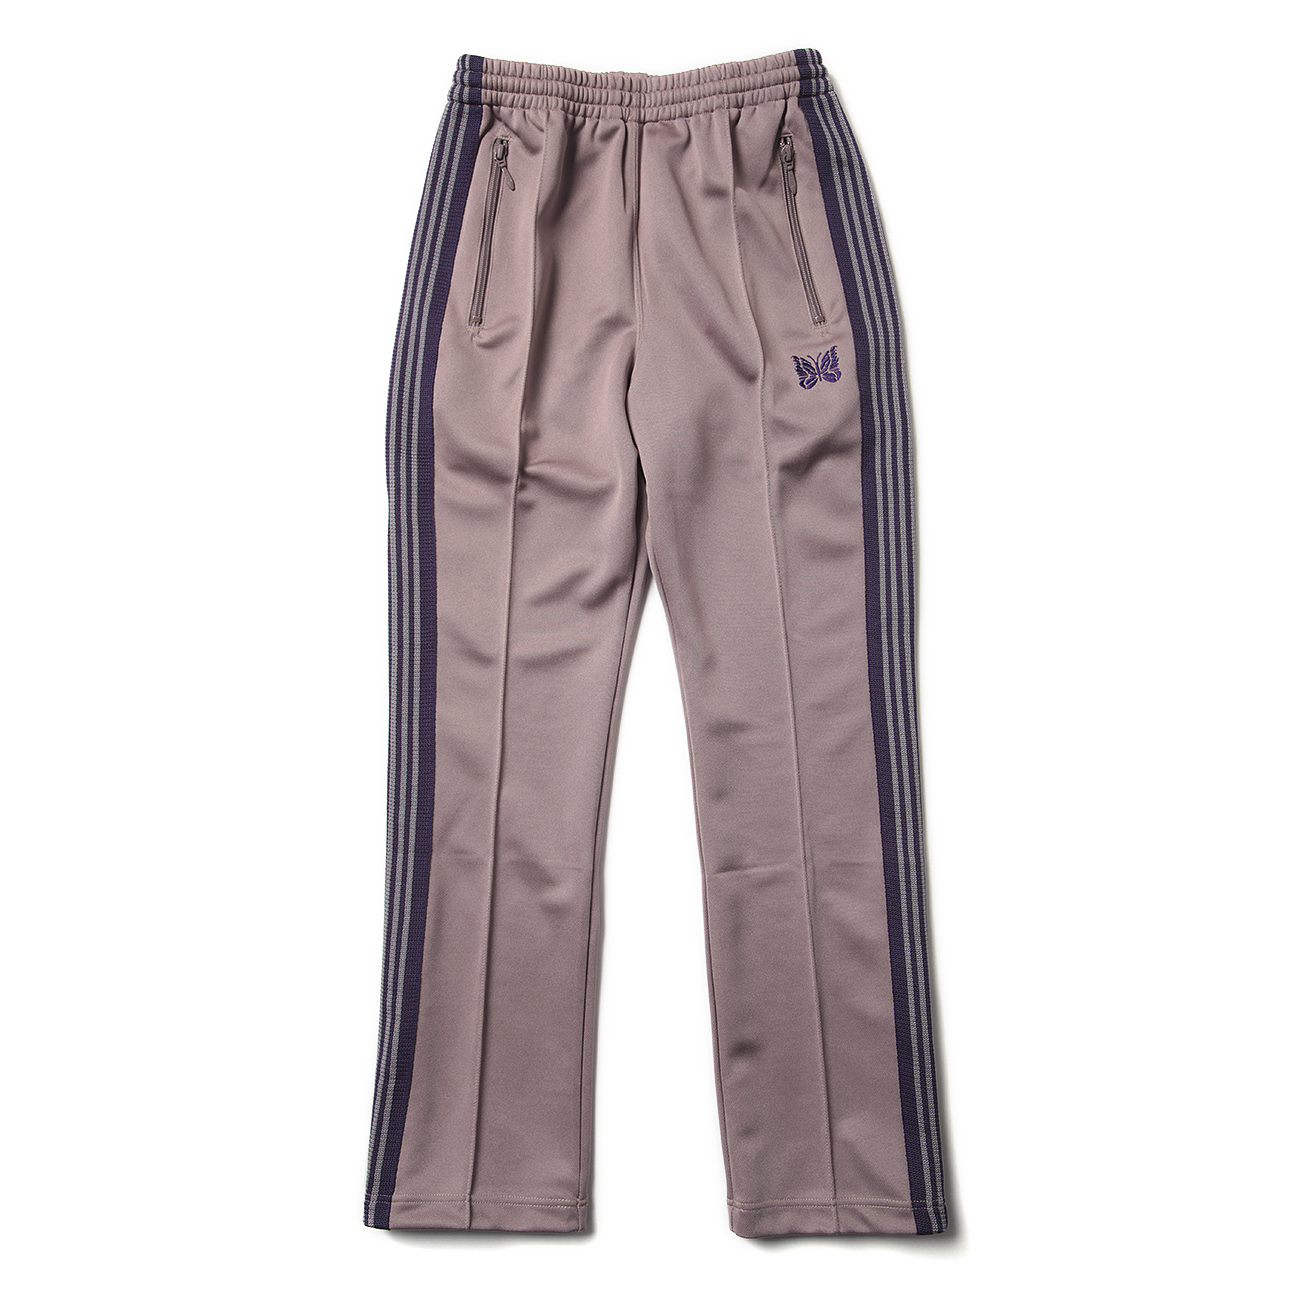 needles Narrow Track Pant Taupe ♯254 | www.innoveering.net